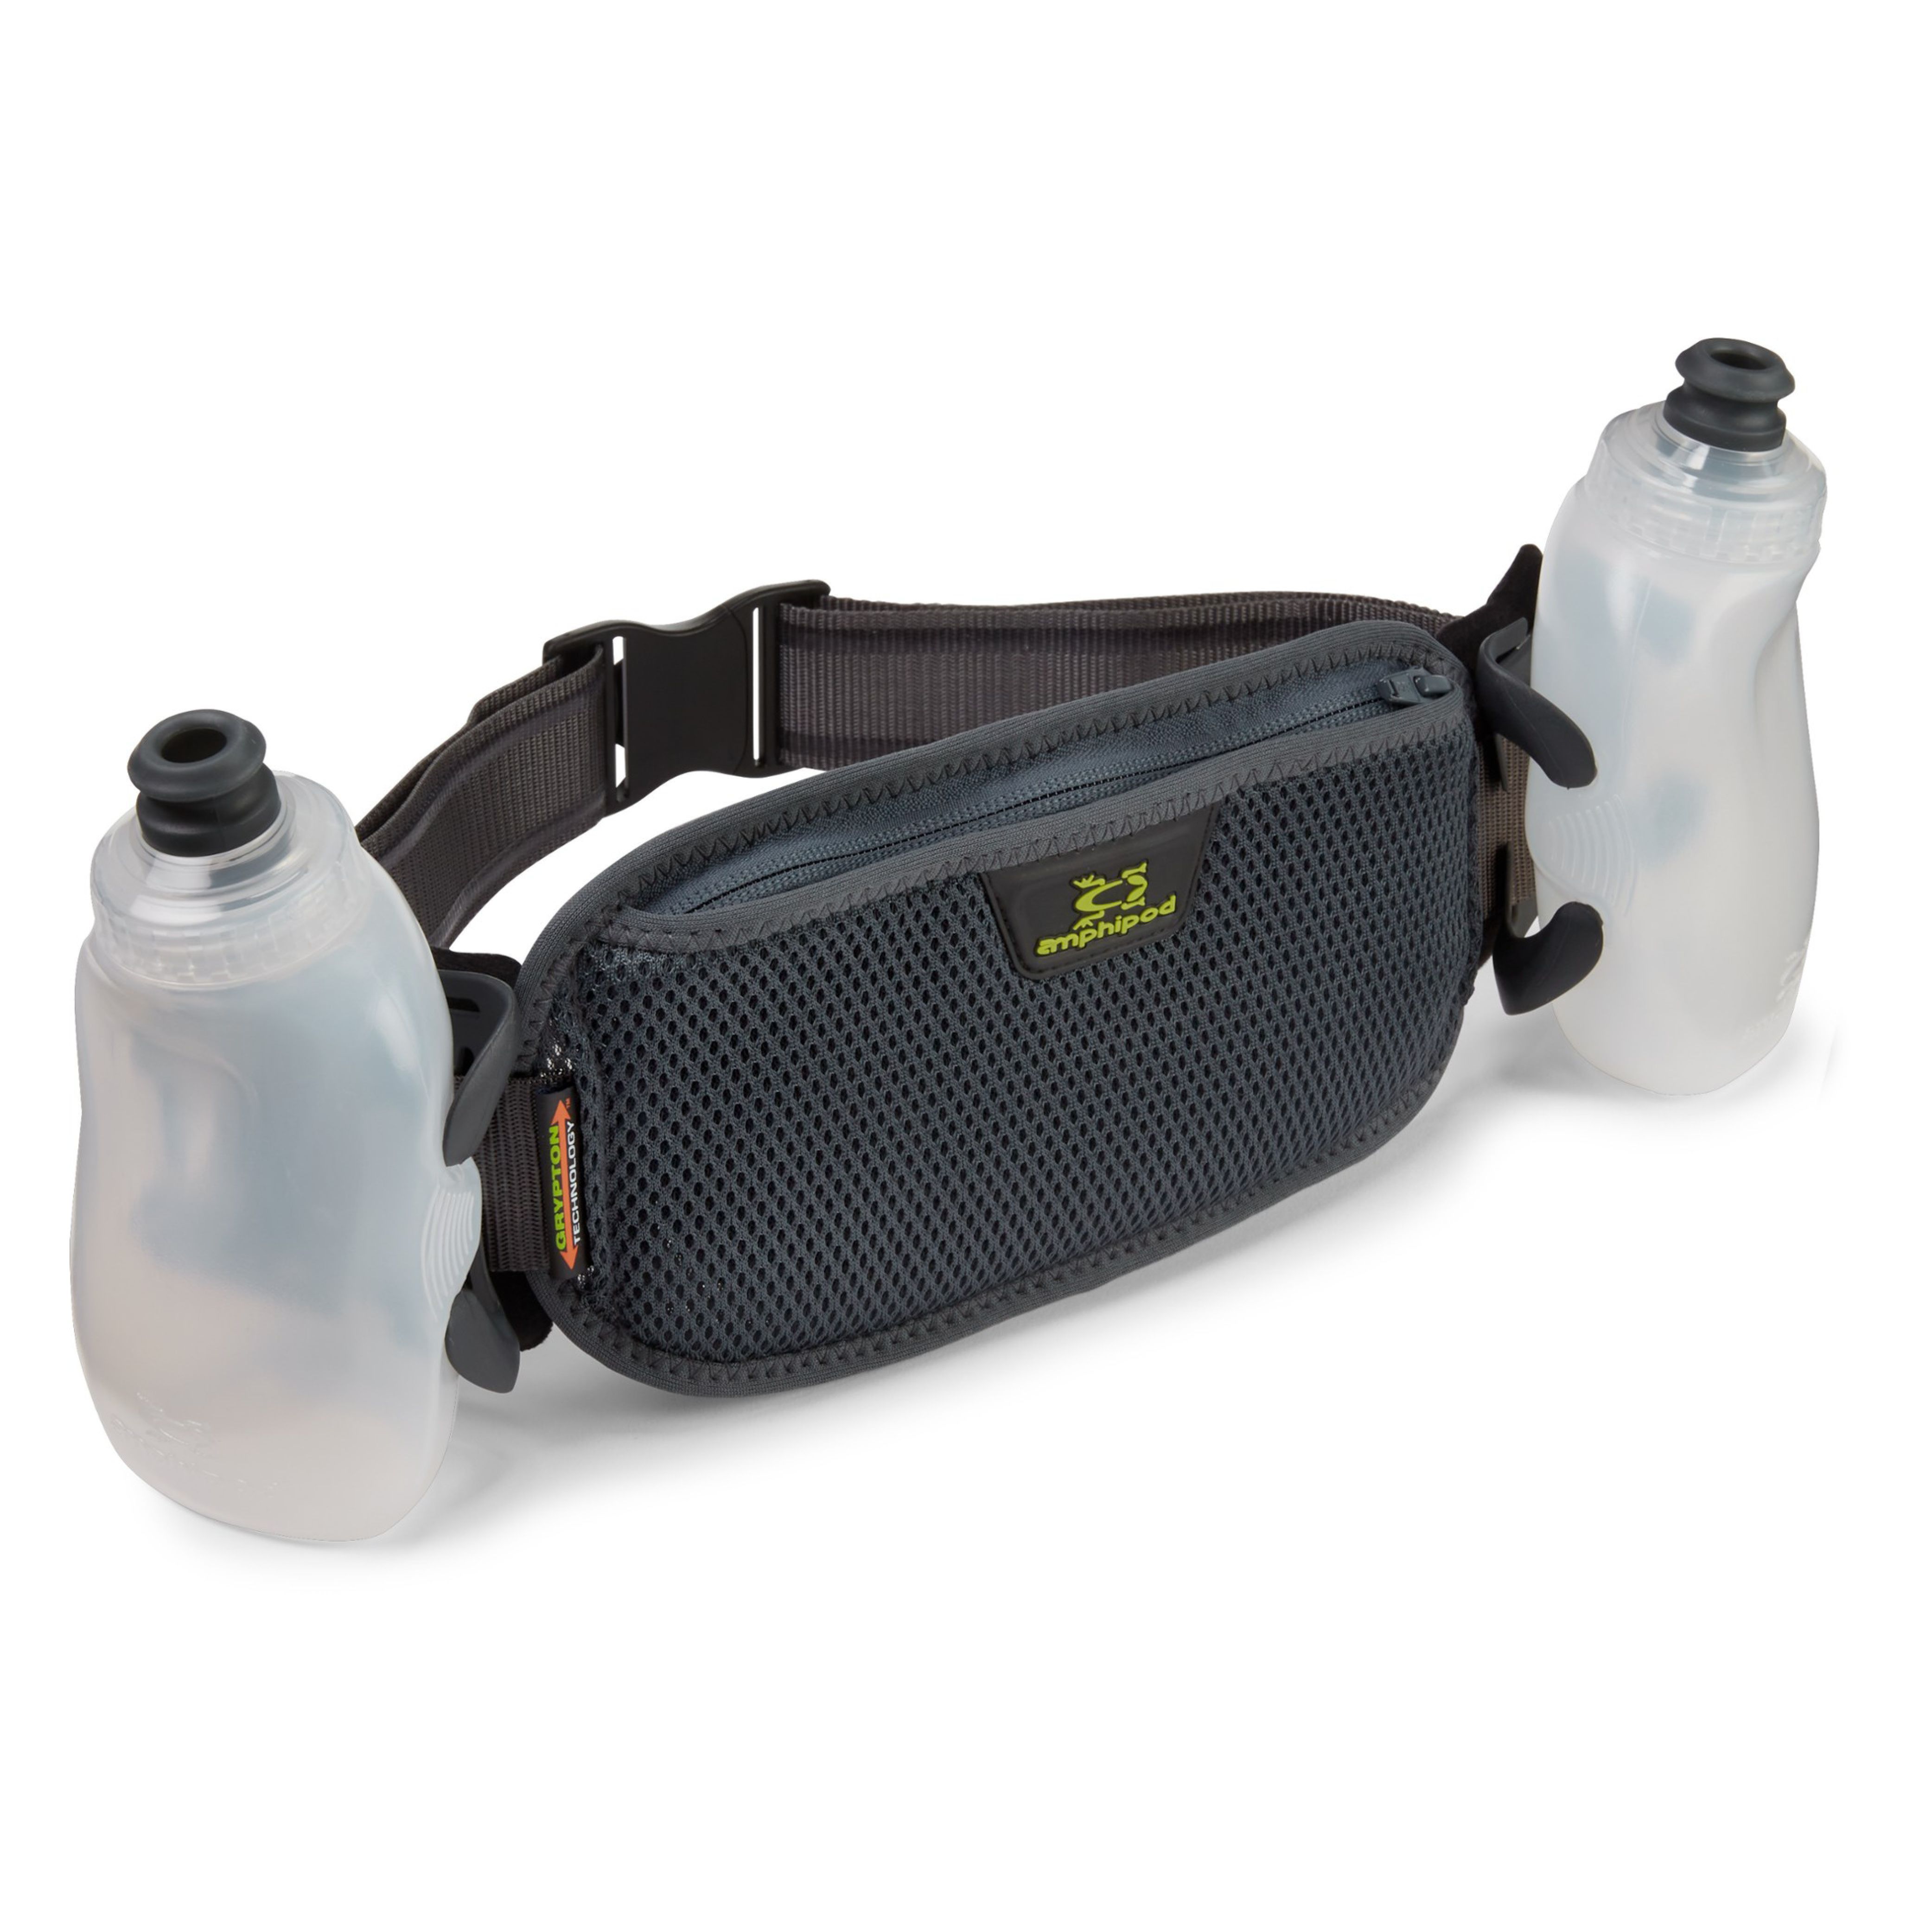 Hydration Belt With 2 Water Bottles And Zip Compartment New 